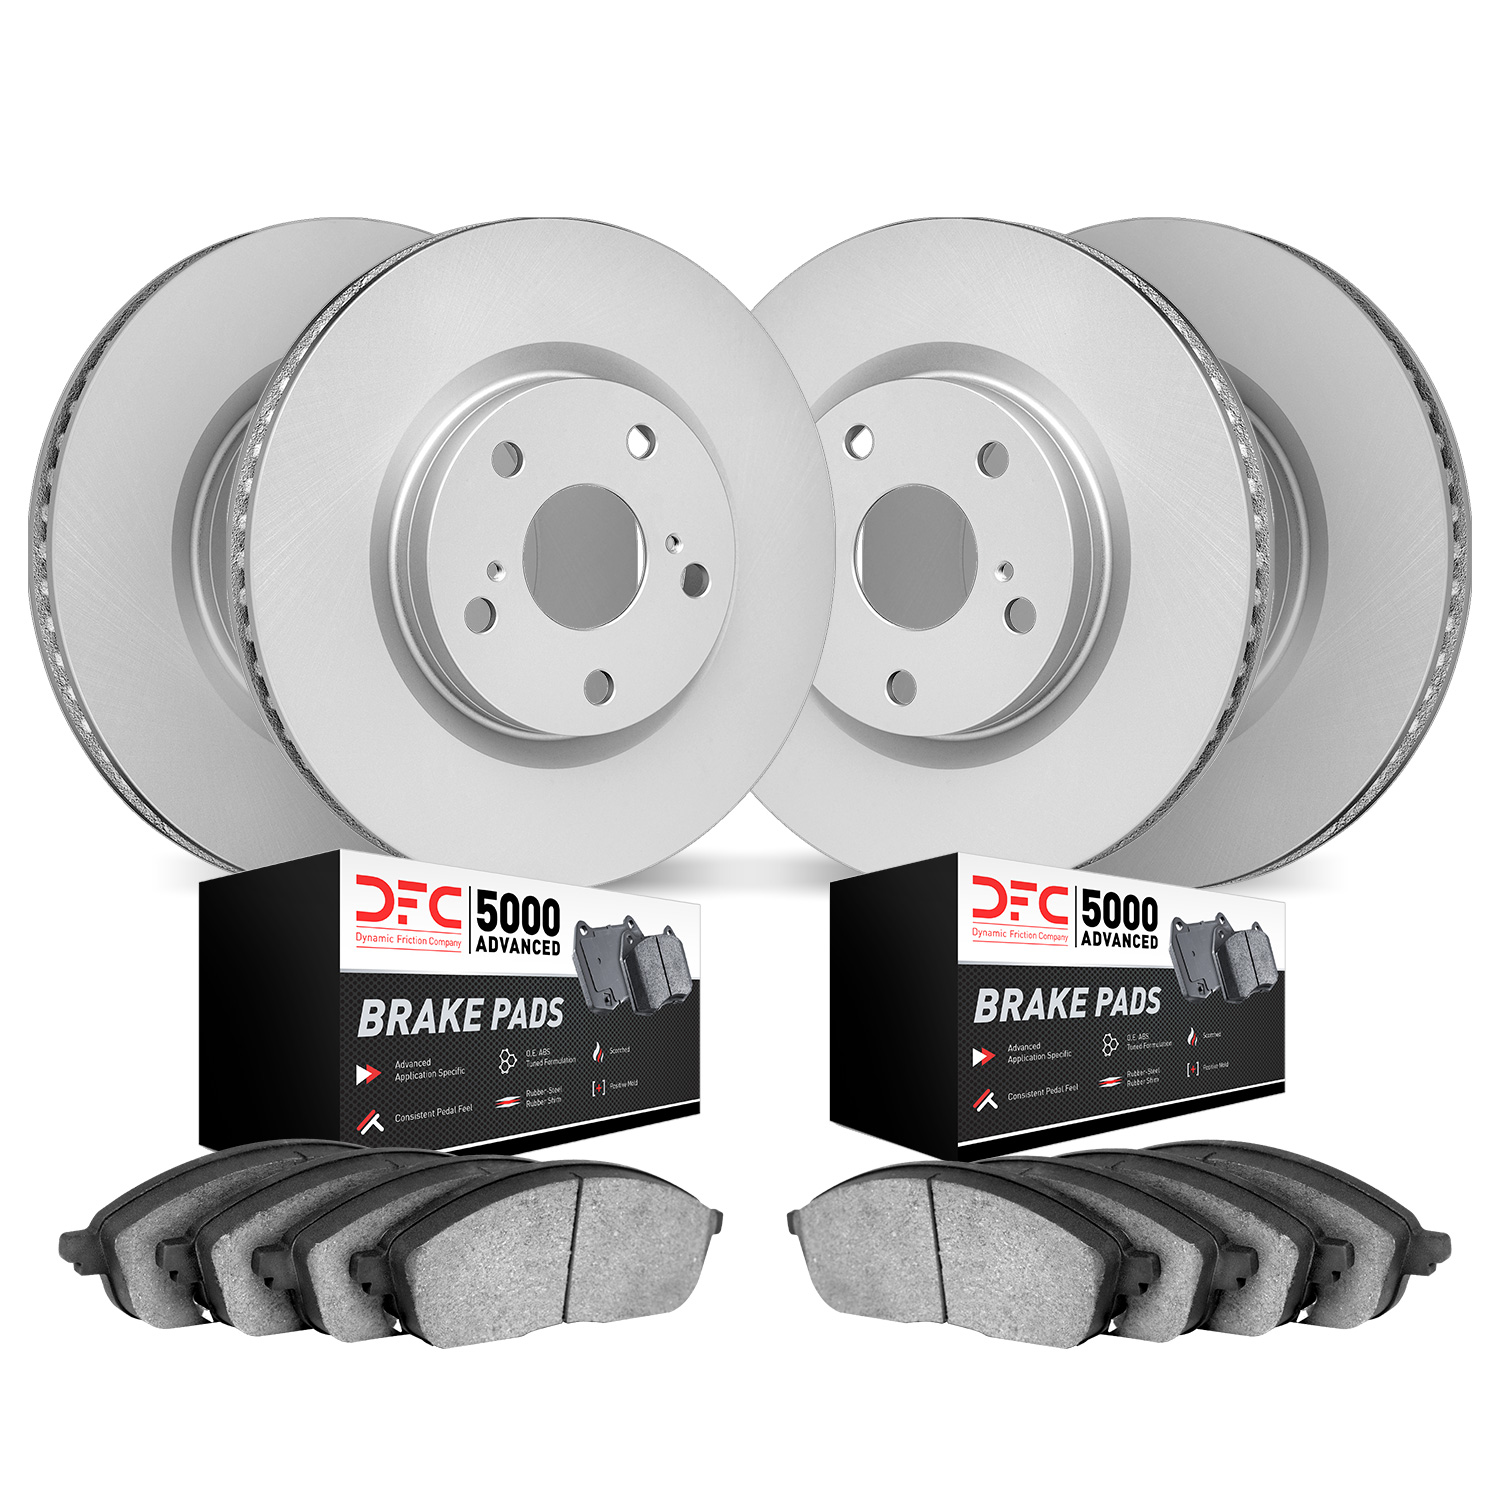 4504-76059 Geospec Brake Rotors w/5000 Advanced Brake Pads Kit, Fits Select Lexus/Toyota/Scion, Position: Front and Rear